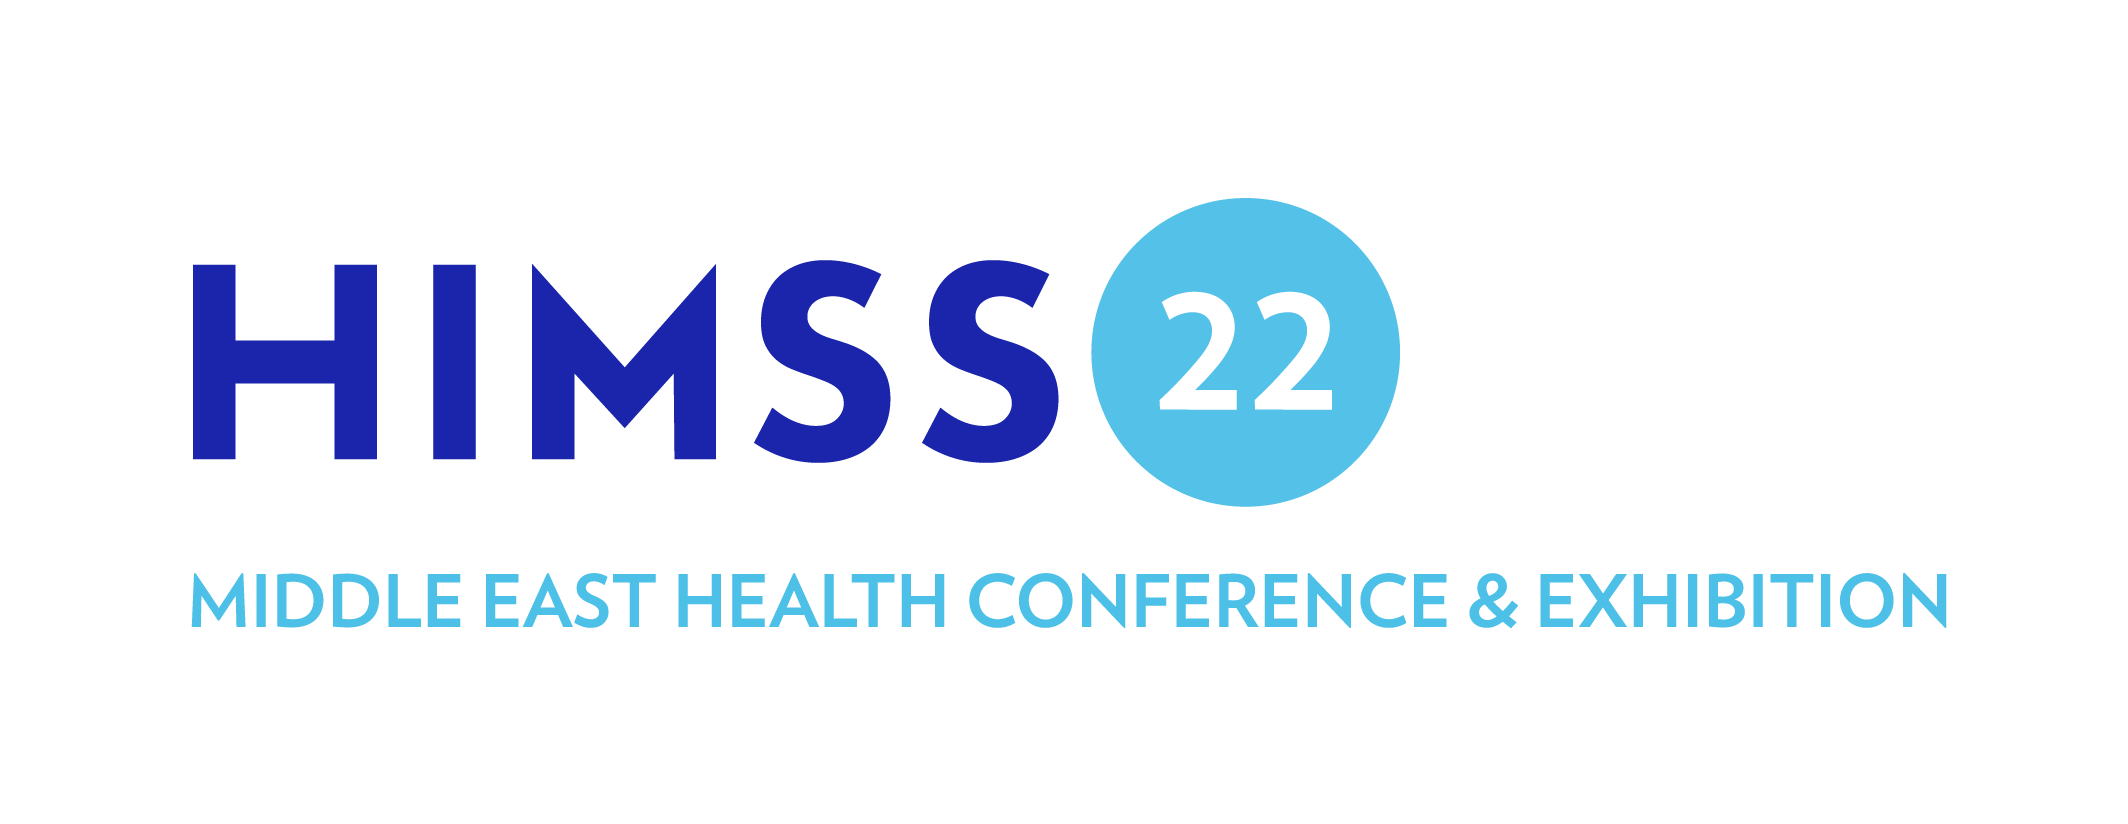 HIMSS22_Middle East_Logo_White_Sky@2x.png